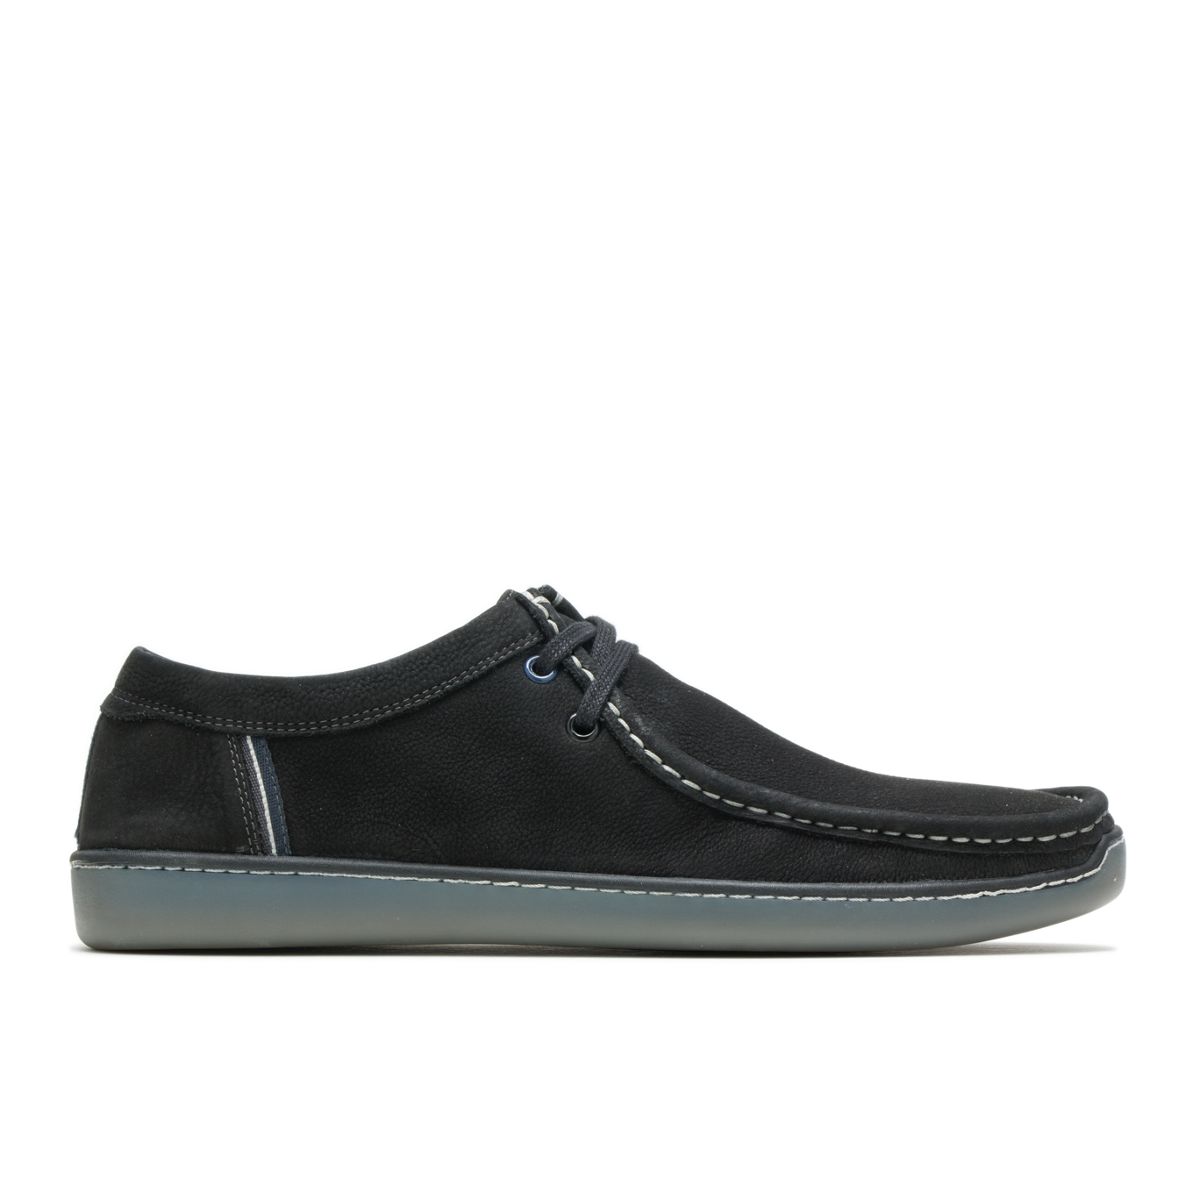  Mens Oxfords Concise Bussiness Office Shoes Black Pu